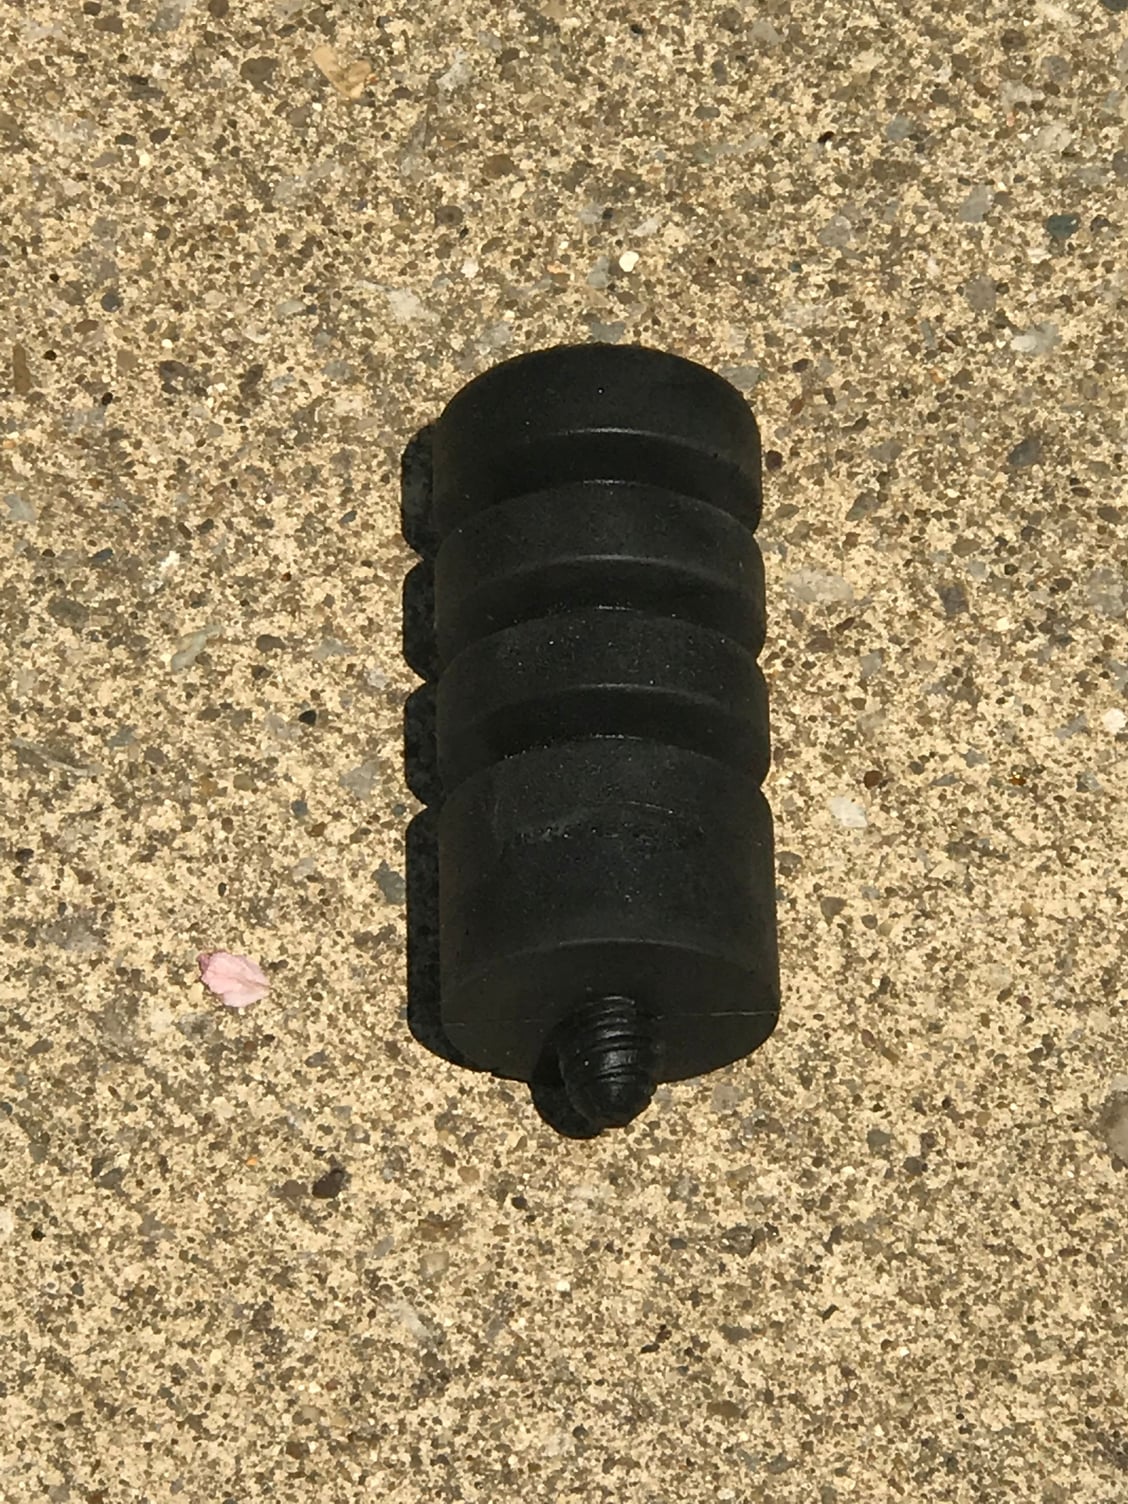 Miscellaneous - Garage clean out. Random Parts - Used - 2009 to 2011 Jeep Wrangler - Sellersburg, IN 47172, United States